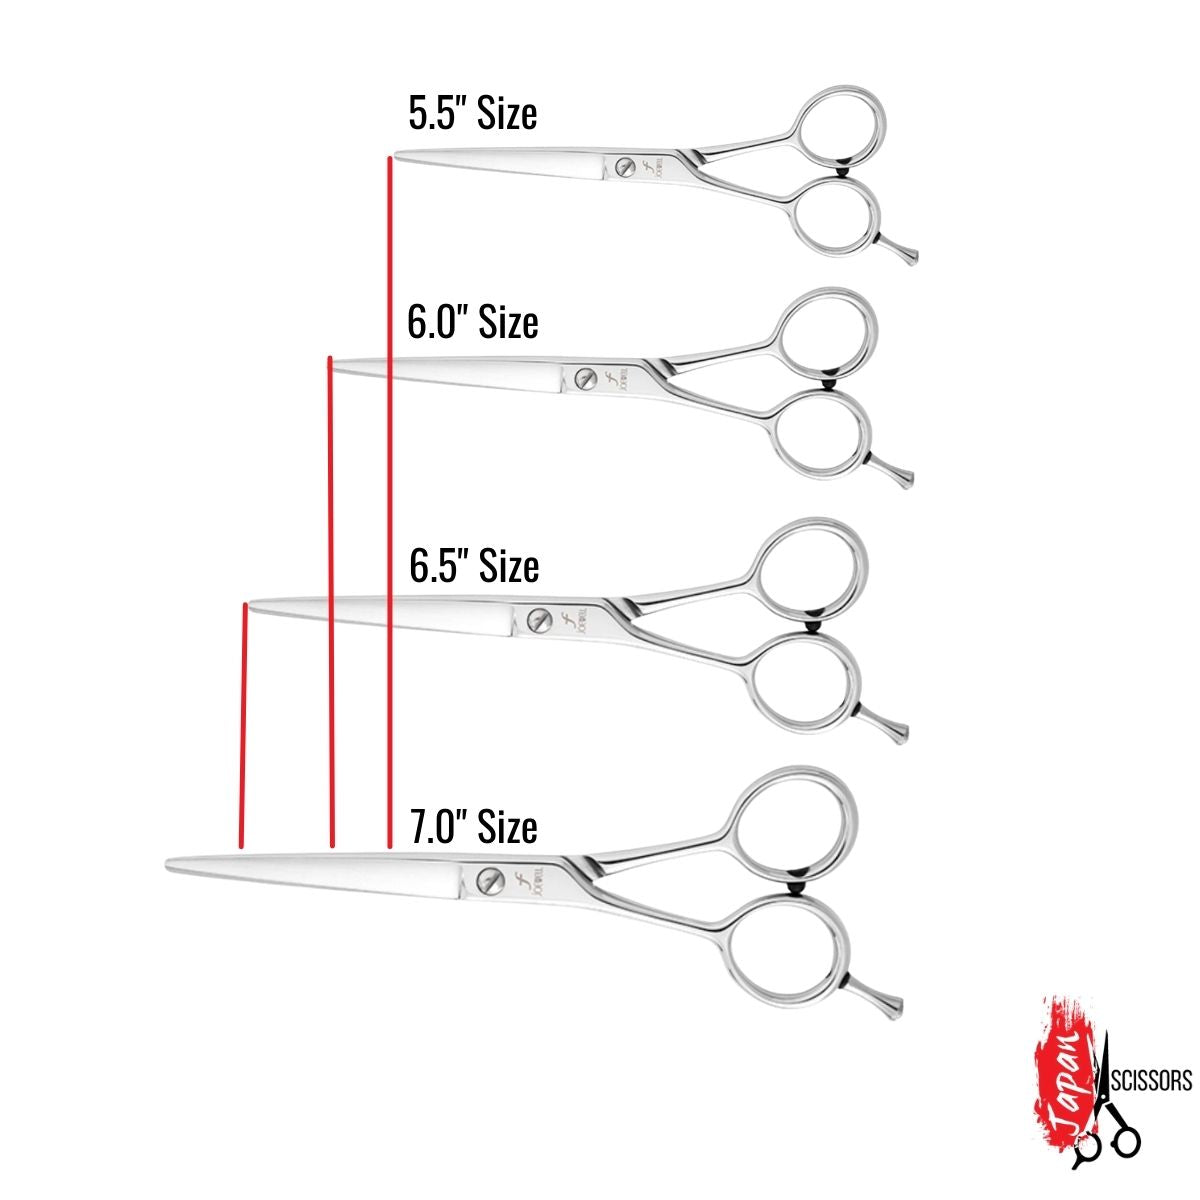 The difference sizes of haircutting shears found in American salons and barbershops